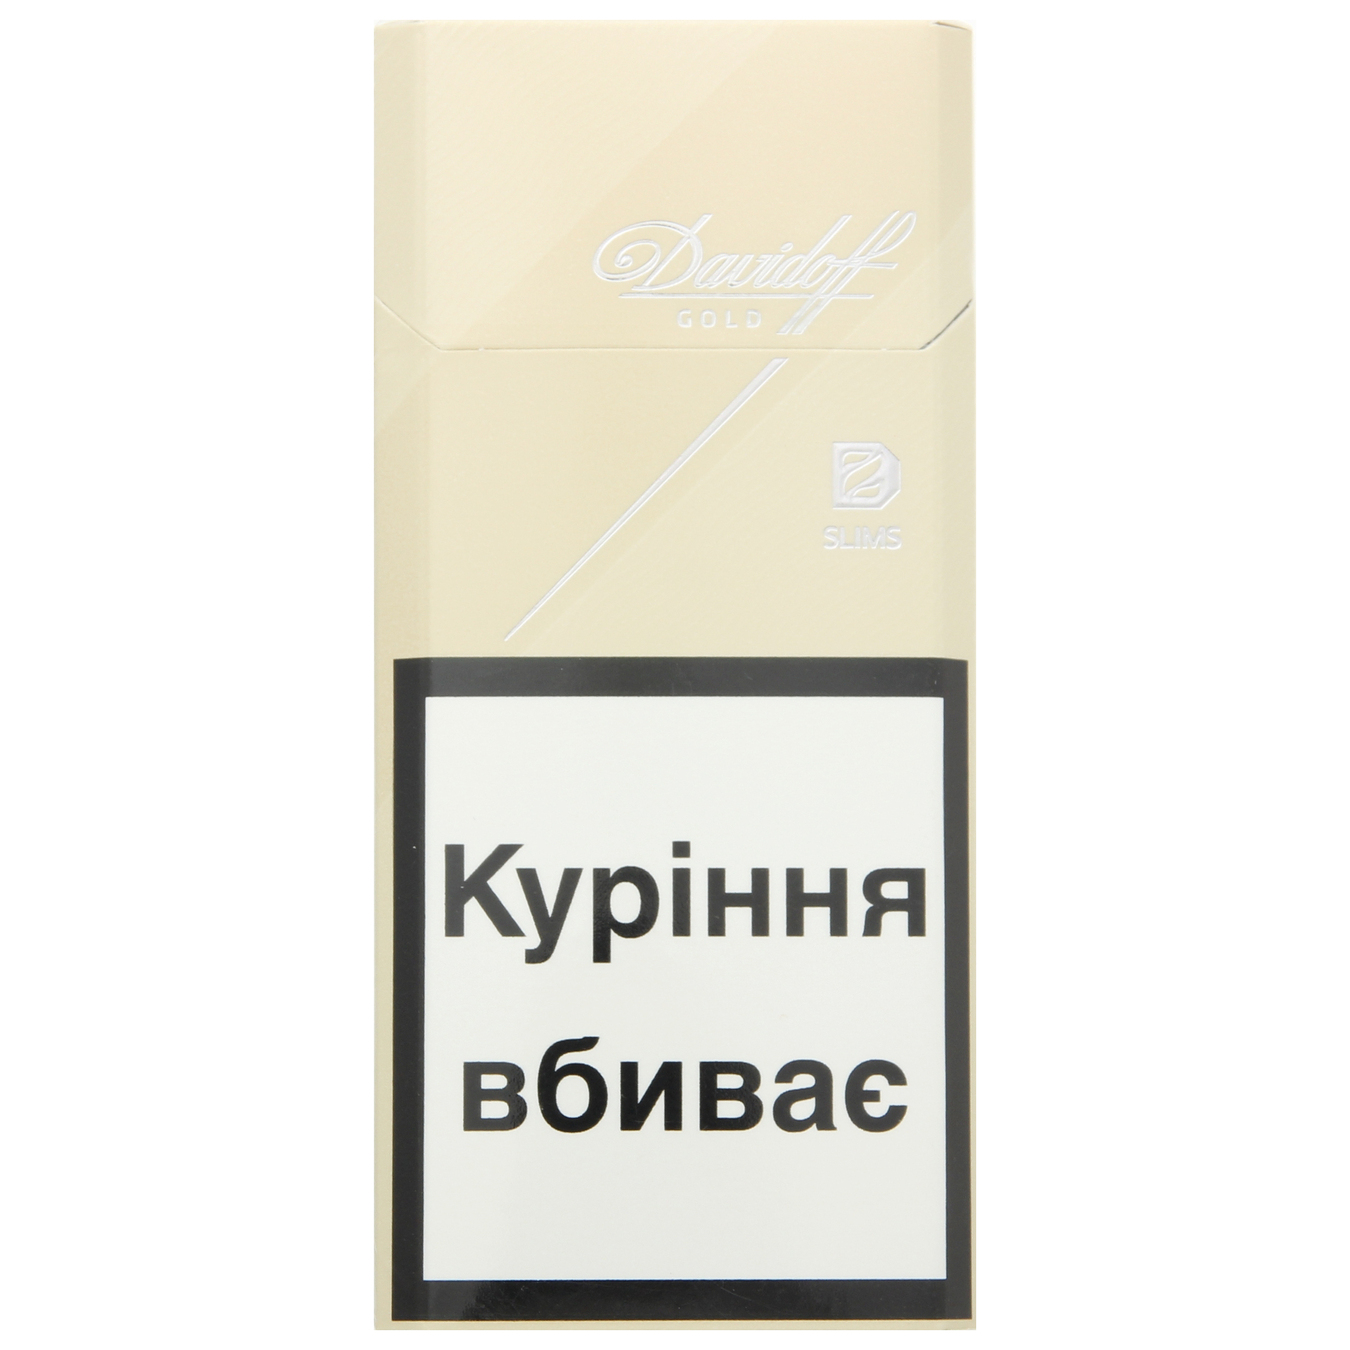 Davidoff Gold Slims cigarettes 20 pcs (the price is indicated without excise tax)